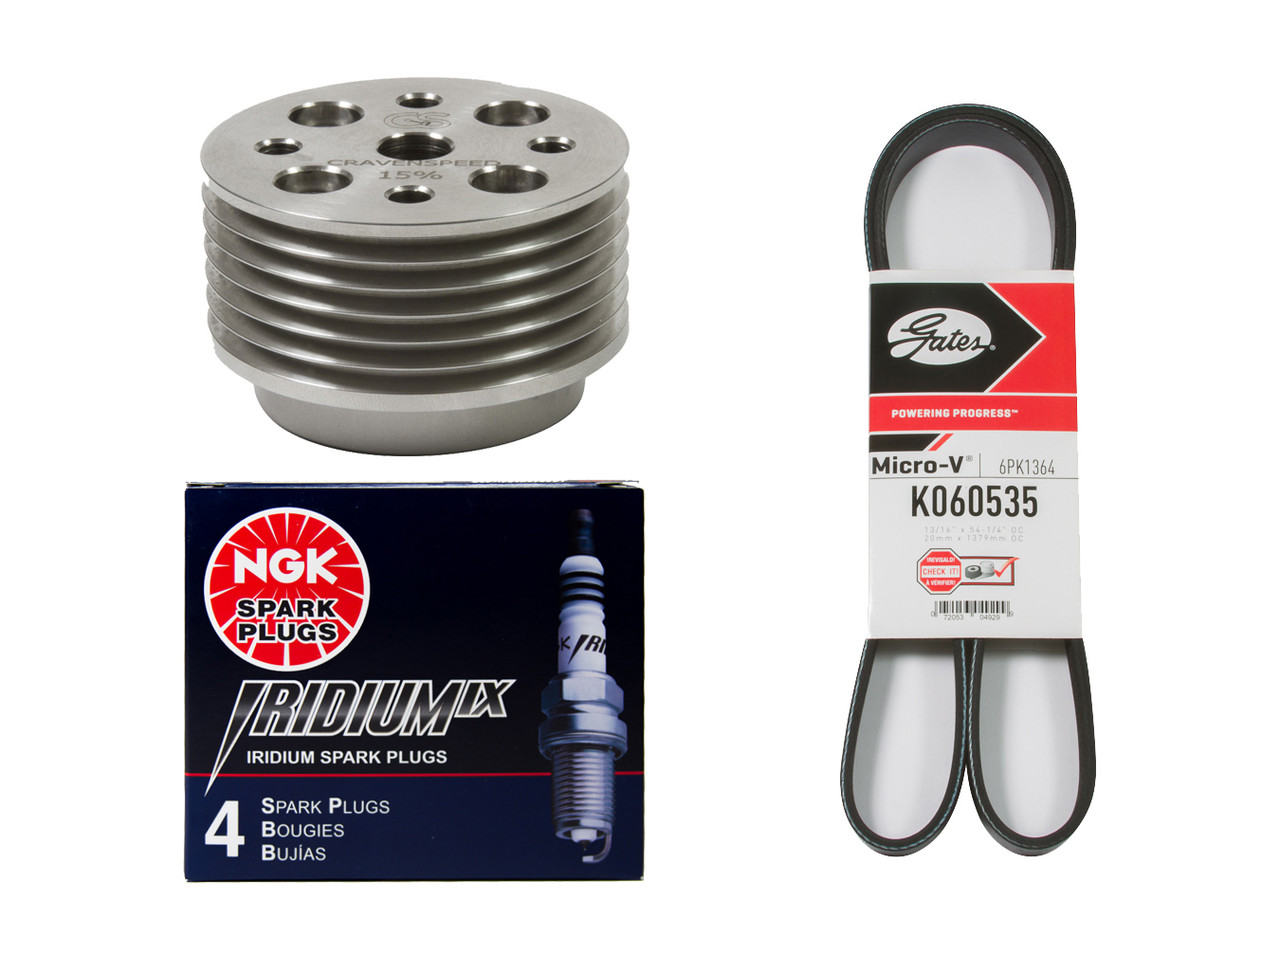 https://cdn11.bigcommerce.com/s-351ed/images/stencil/{:size}/products/20611/223970/supercharger_pulley_for_mini_cooper_r53_2001_to_2006_performance_kit_w_15_pulley_IBCYMHV_20611__85375.1703204843.jpg?c=2